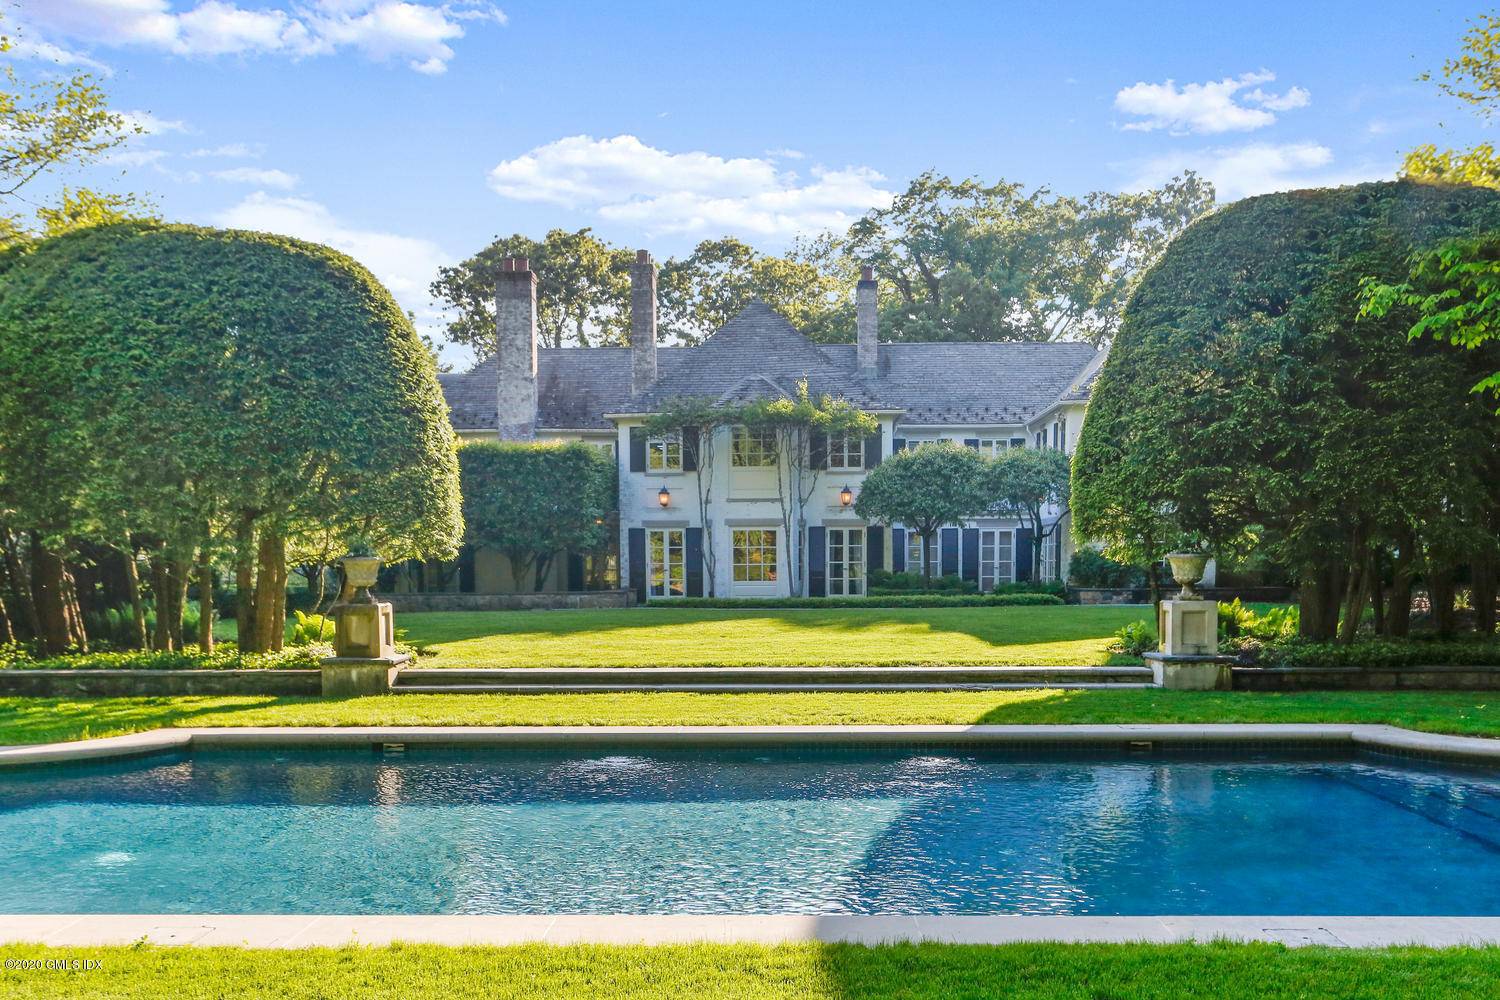 Experience the ultimate compound in this pre war French country manor home.